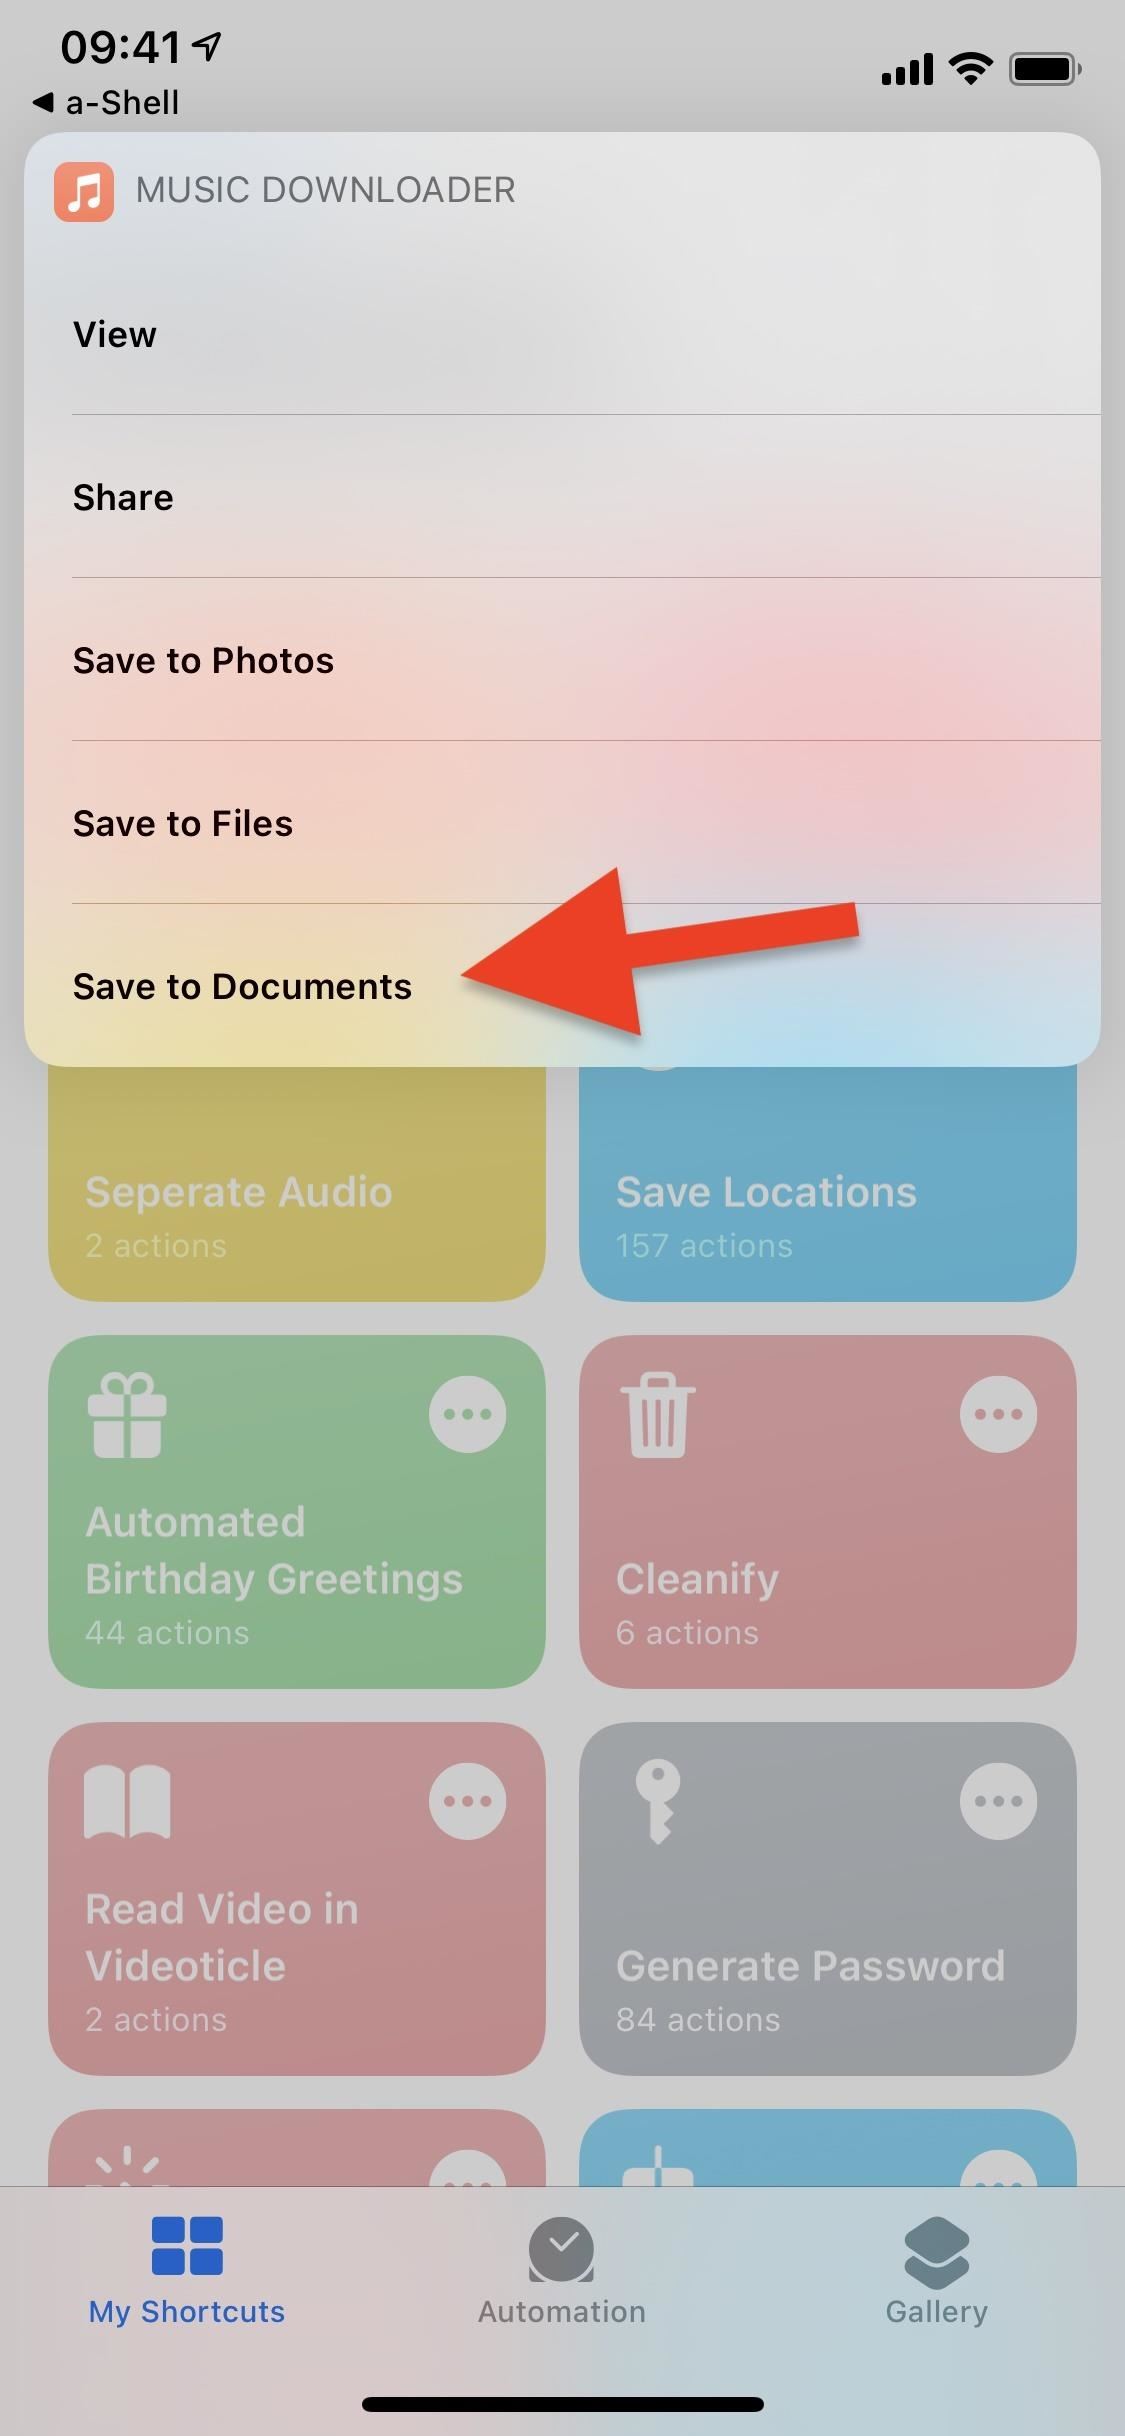 This iOS Shortcut Finds and Downloads Free Songs for You to Listen Offline to Your iPhone